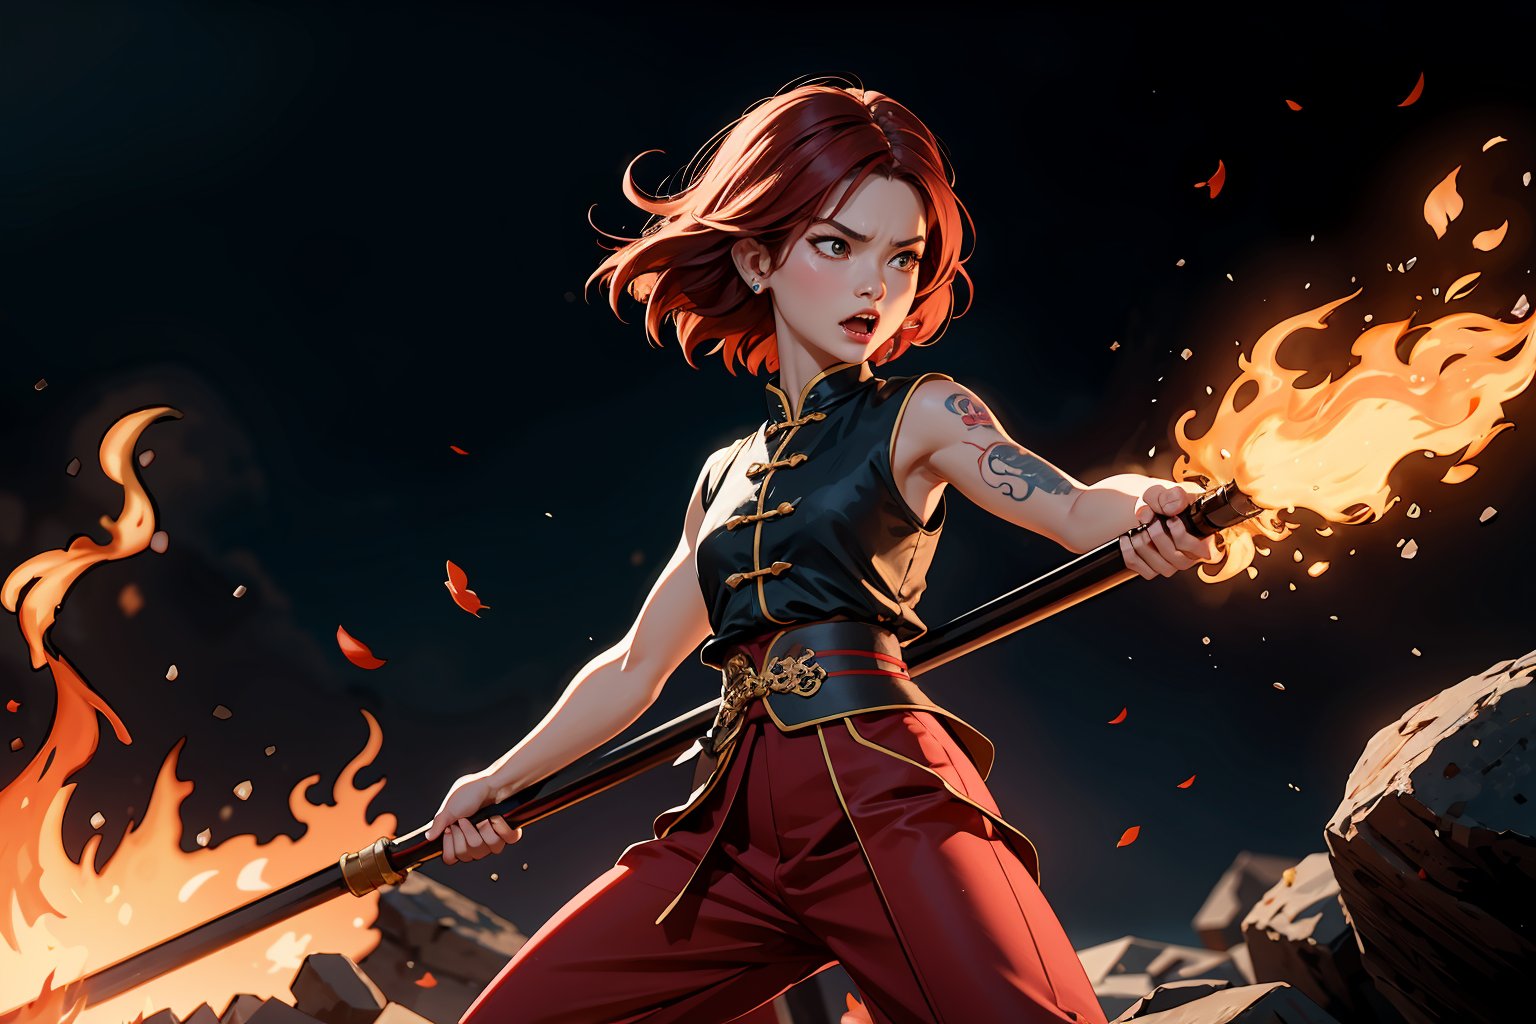 Chinese mythology, solo, 1female, monster_girl, short hair, dark red hair, fury, angry, fangs, sexy lips, pointed ears, strong body, swarthy body, fire phoenix tattoo, (single wing behind), holding a mace, dark red vest, long pants, (full shot:1.2), (show up a small token:1.2), Chinese martial arts animation style